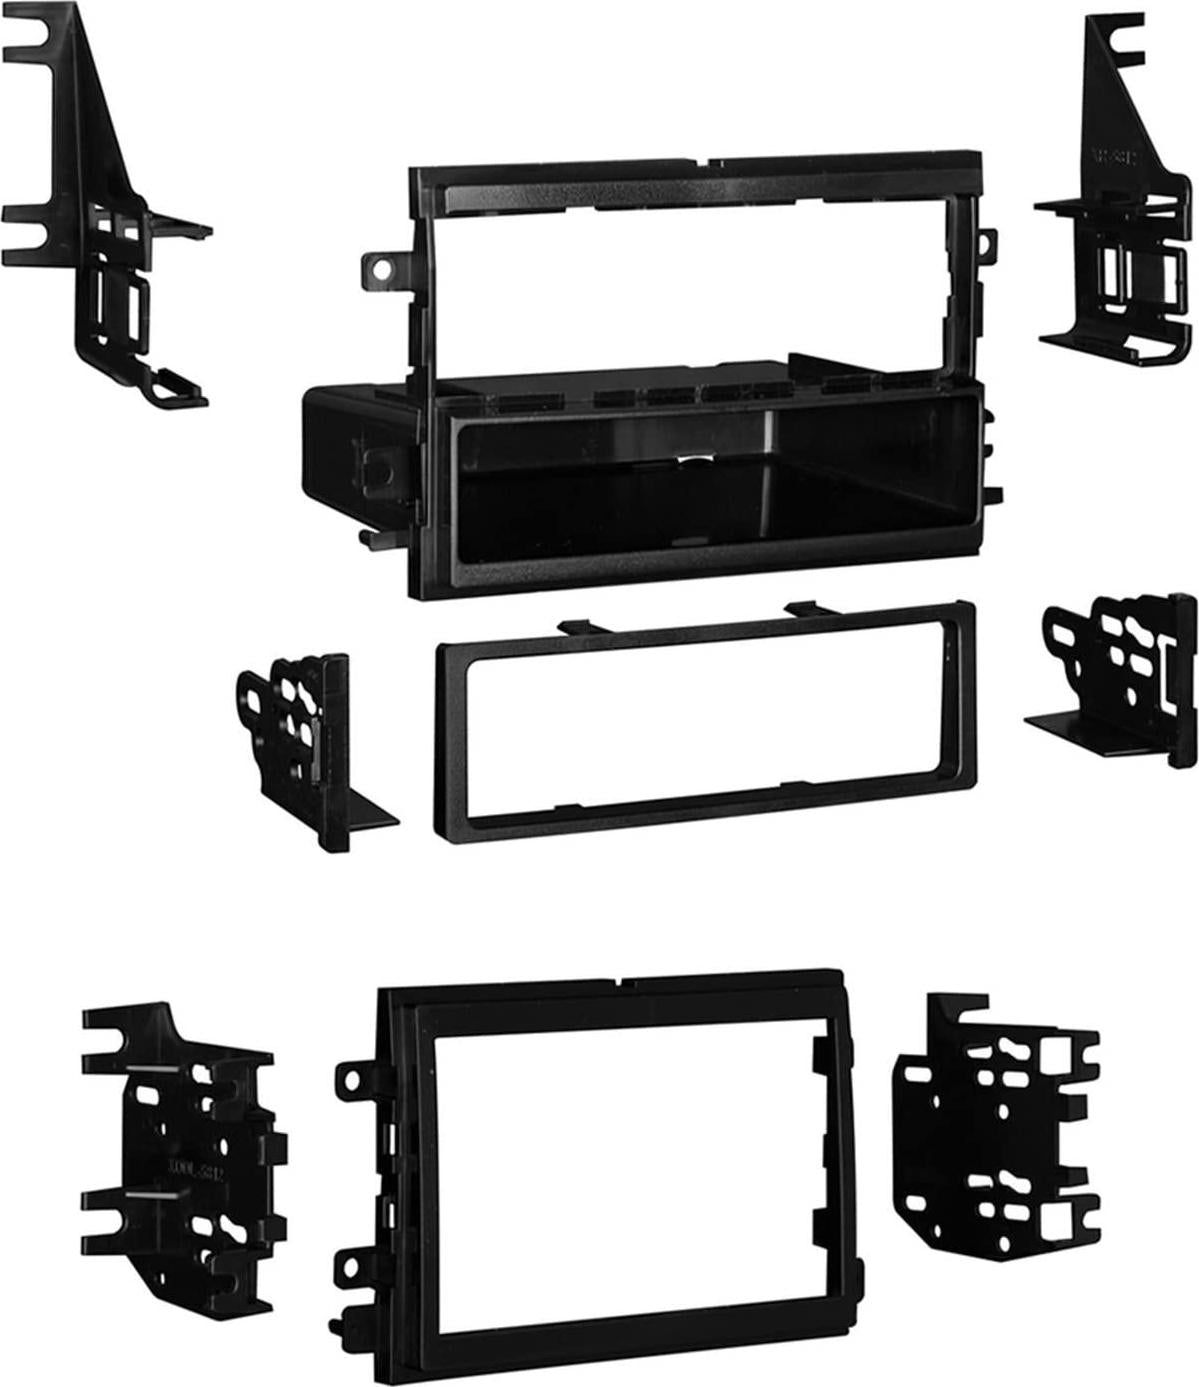 Metra Electronics, Metra 99-5815 Ford/Lincoln/Mercury Installation Dash Kit for Single DIN/Double DIN/ISO Radios